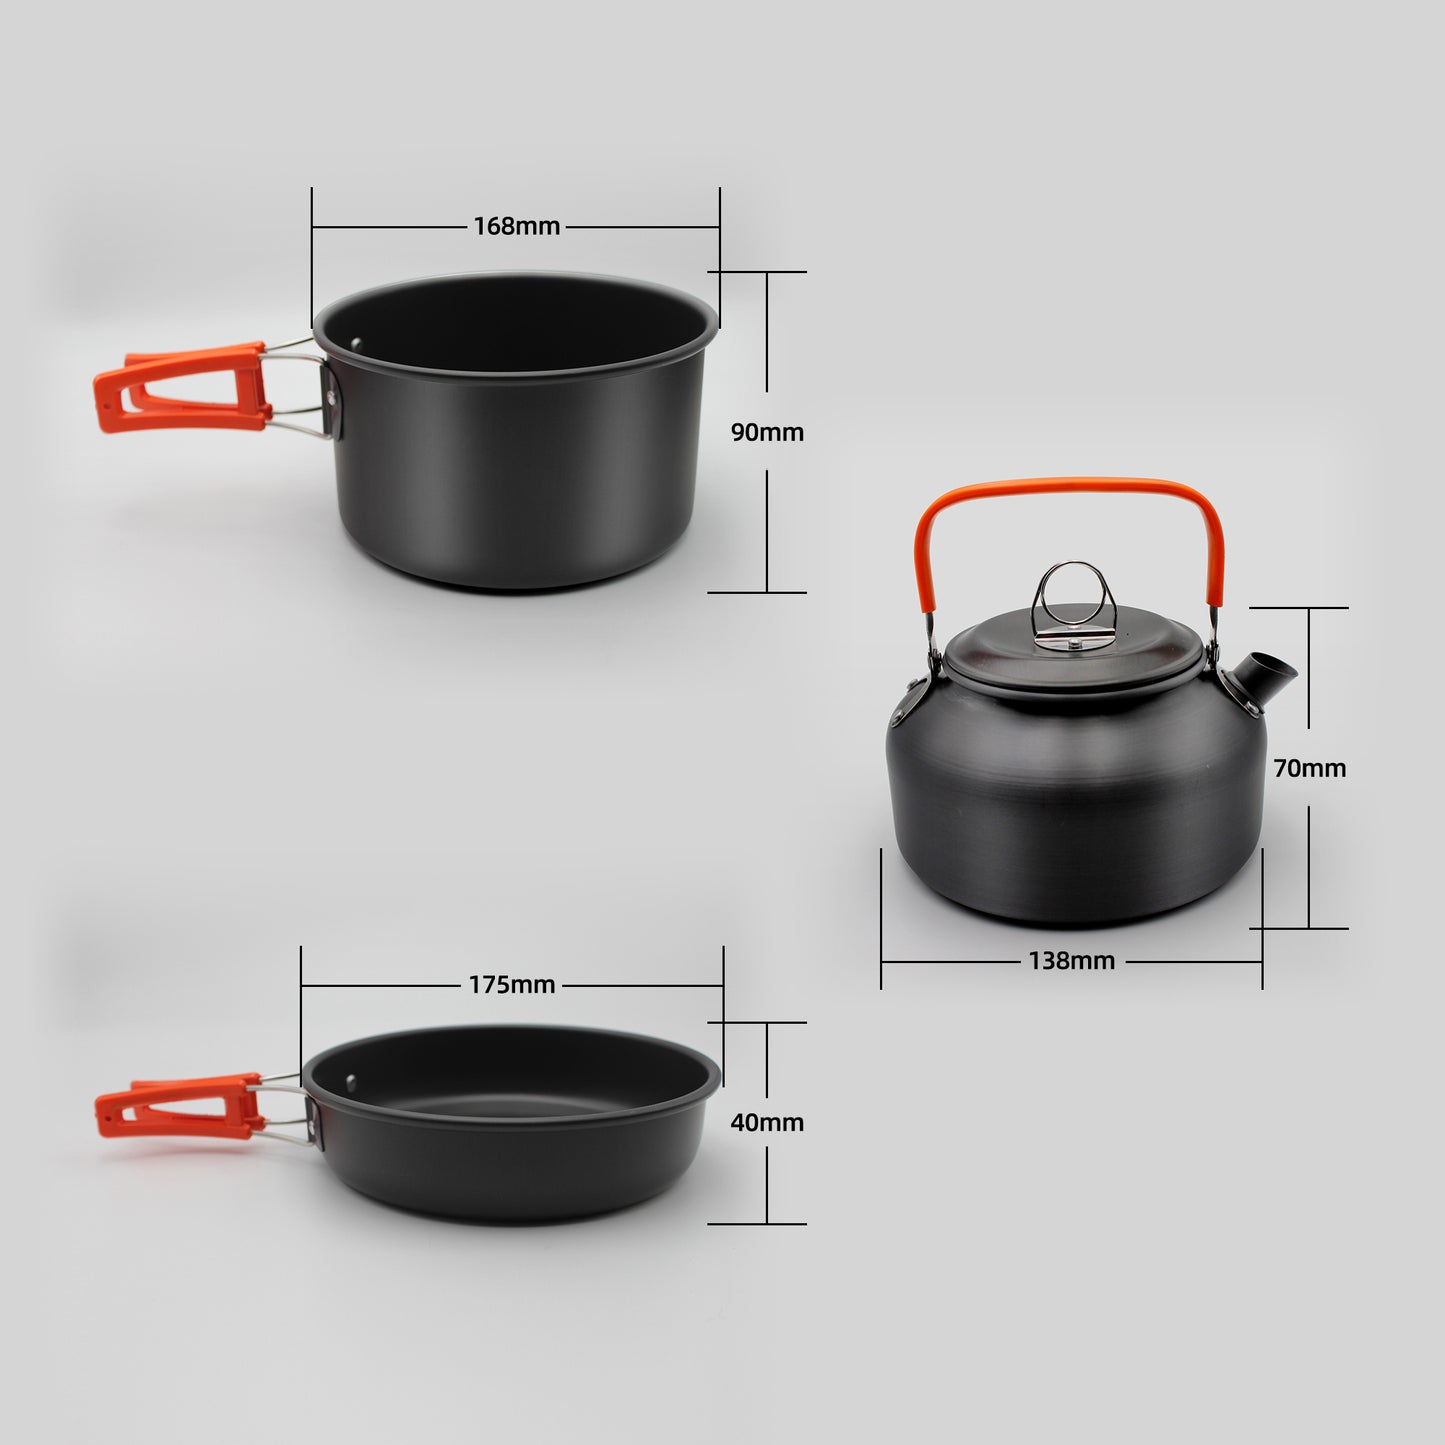 🔥 COZYEVENT Outdoor Camping Cookware Set Non-Stick Cooking Equipment Pan Pot Kettle Bowl